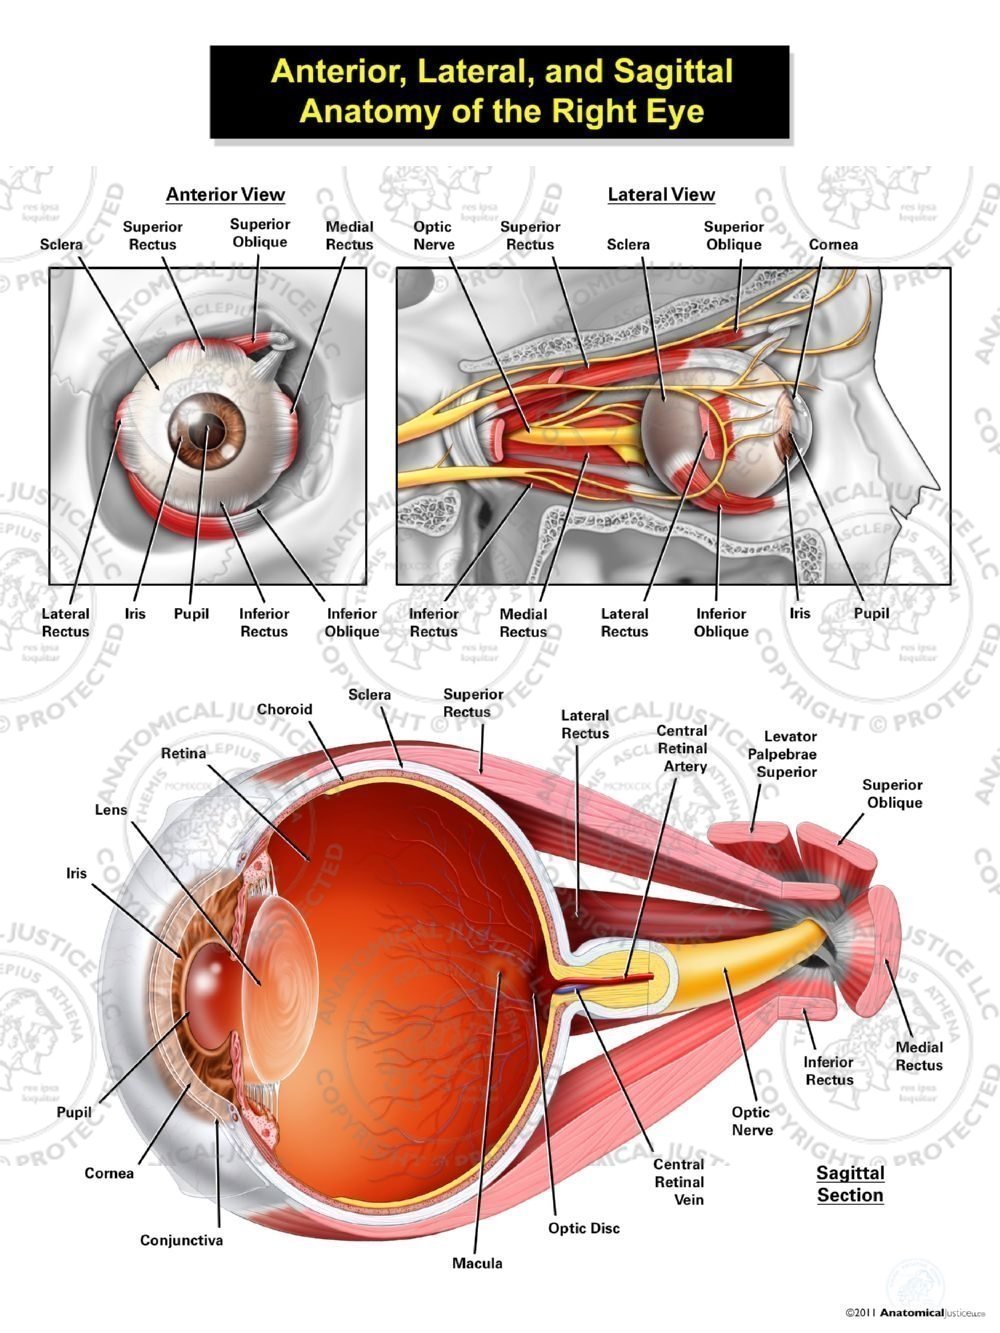 Anterior, Lateral, and Sagittal Anatomy of the Right Eye